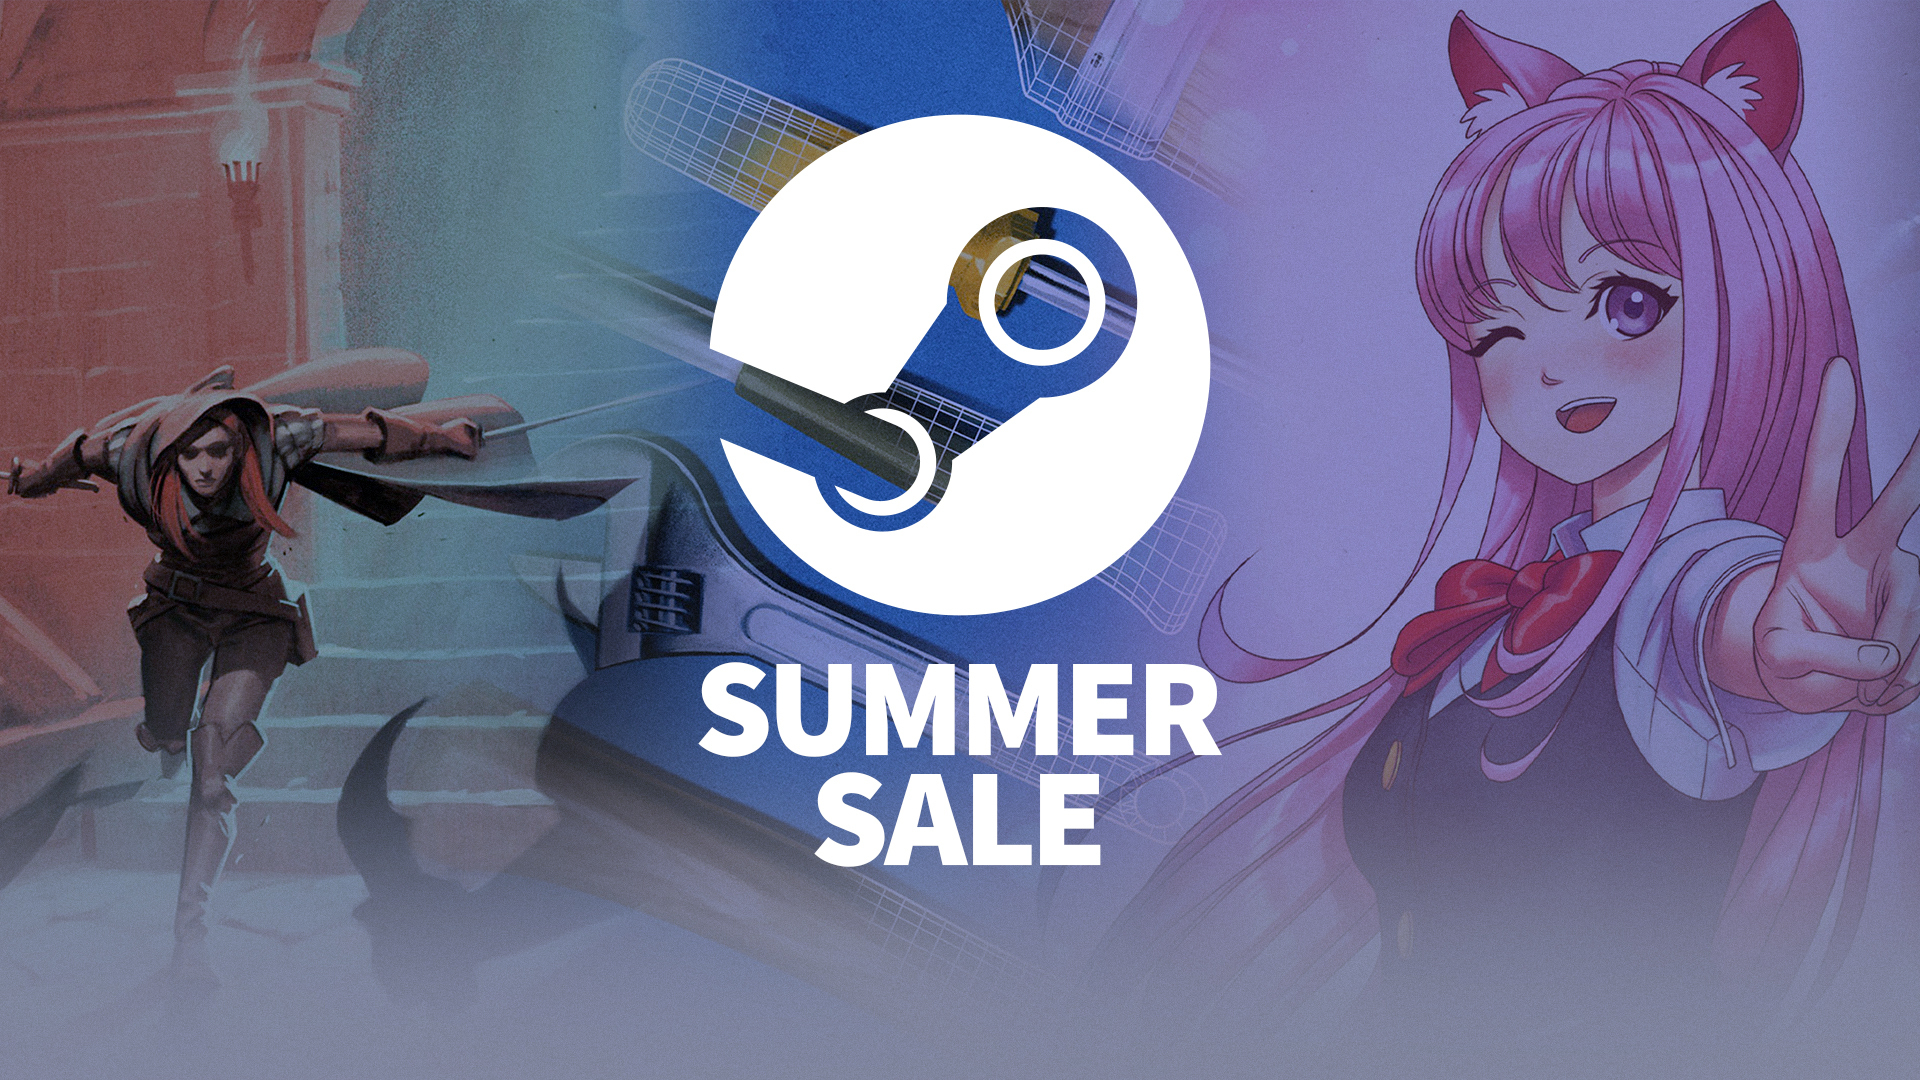 Here’s what I got from the Steam Summer Sale and other Steam games I